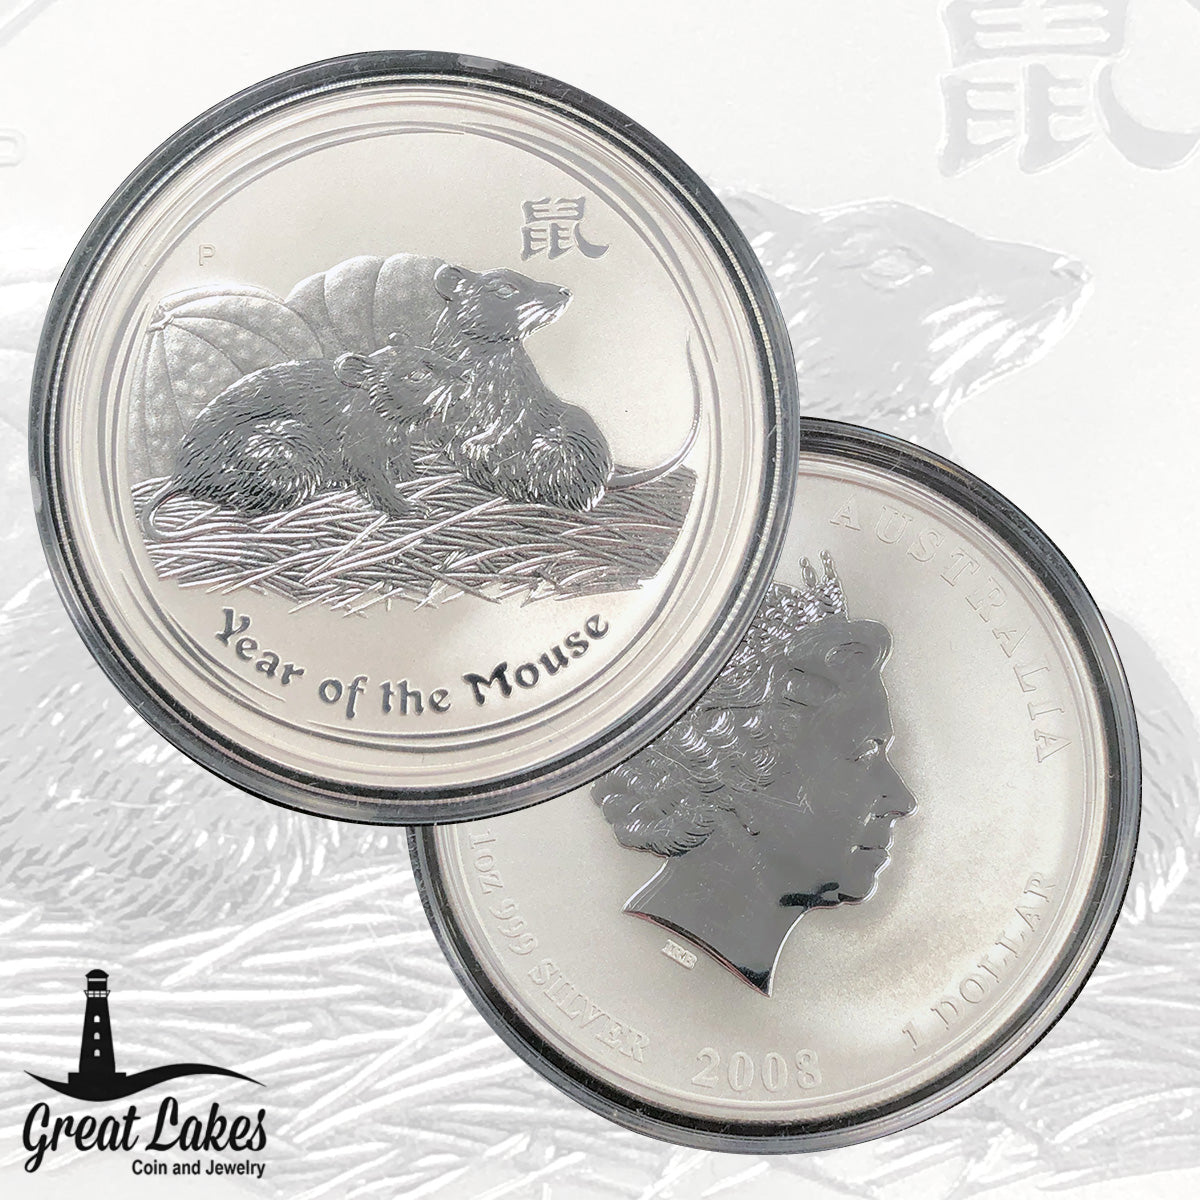 Perth Mint 2008 Year of the Mouse 1 oz Silver Coin